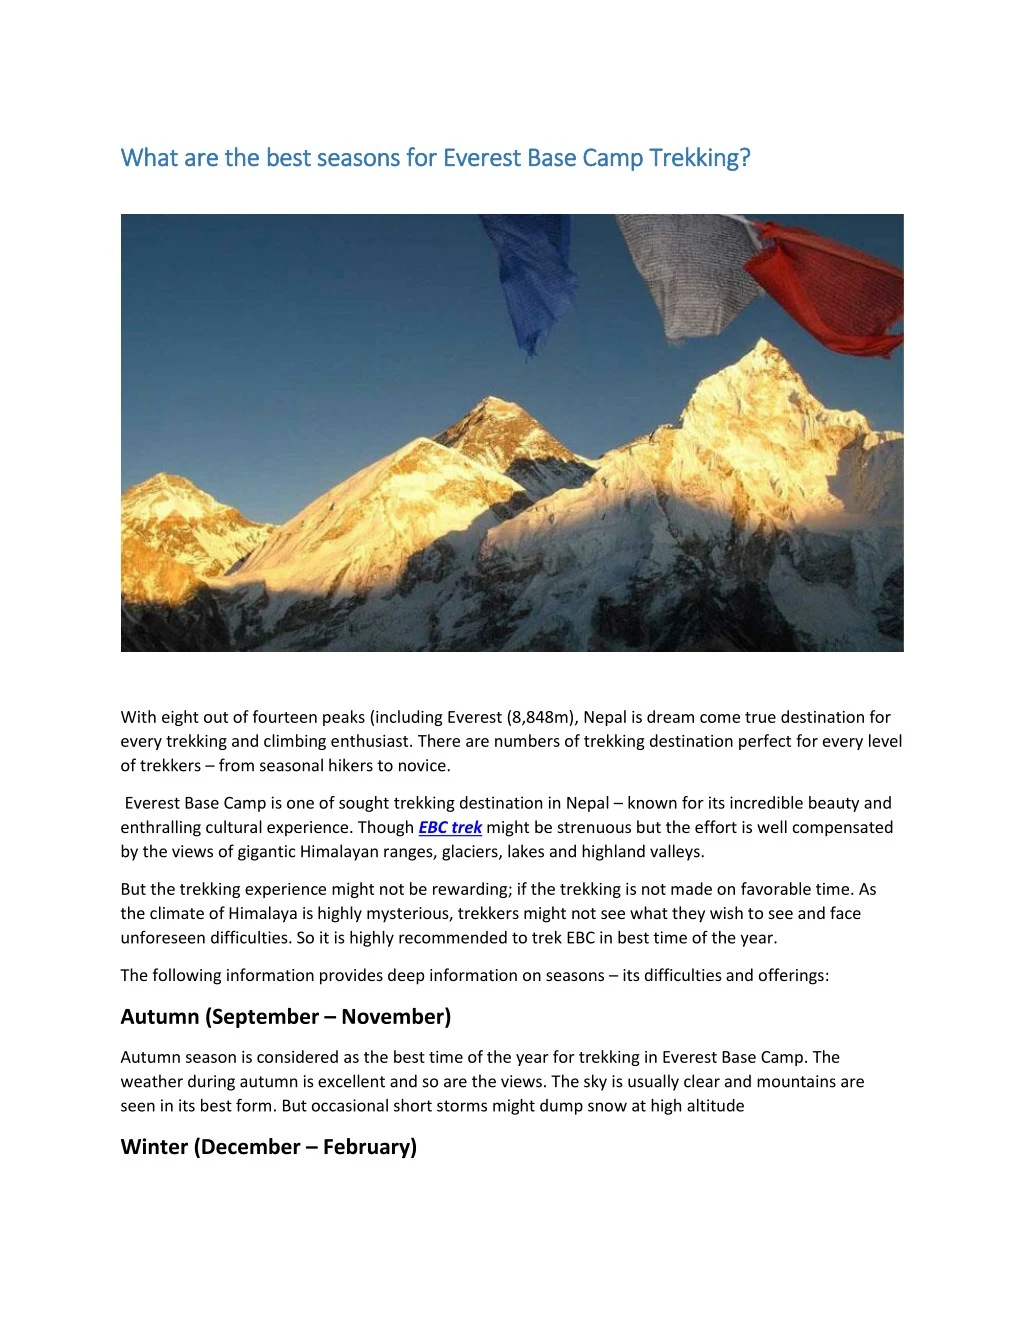 what are the best seasons for everest base camp